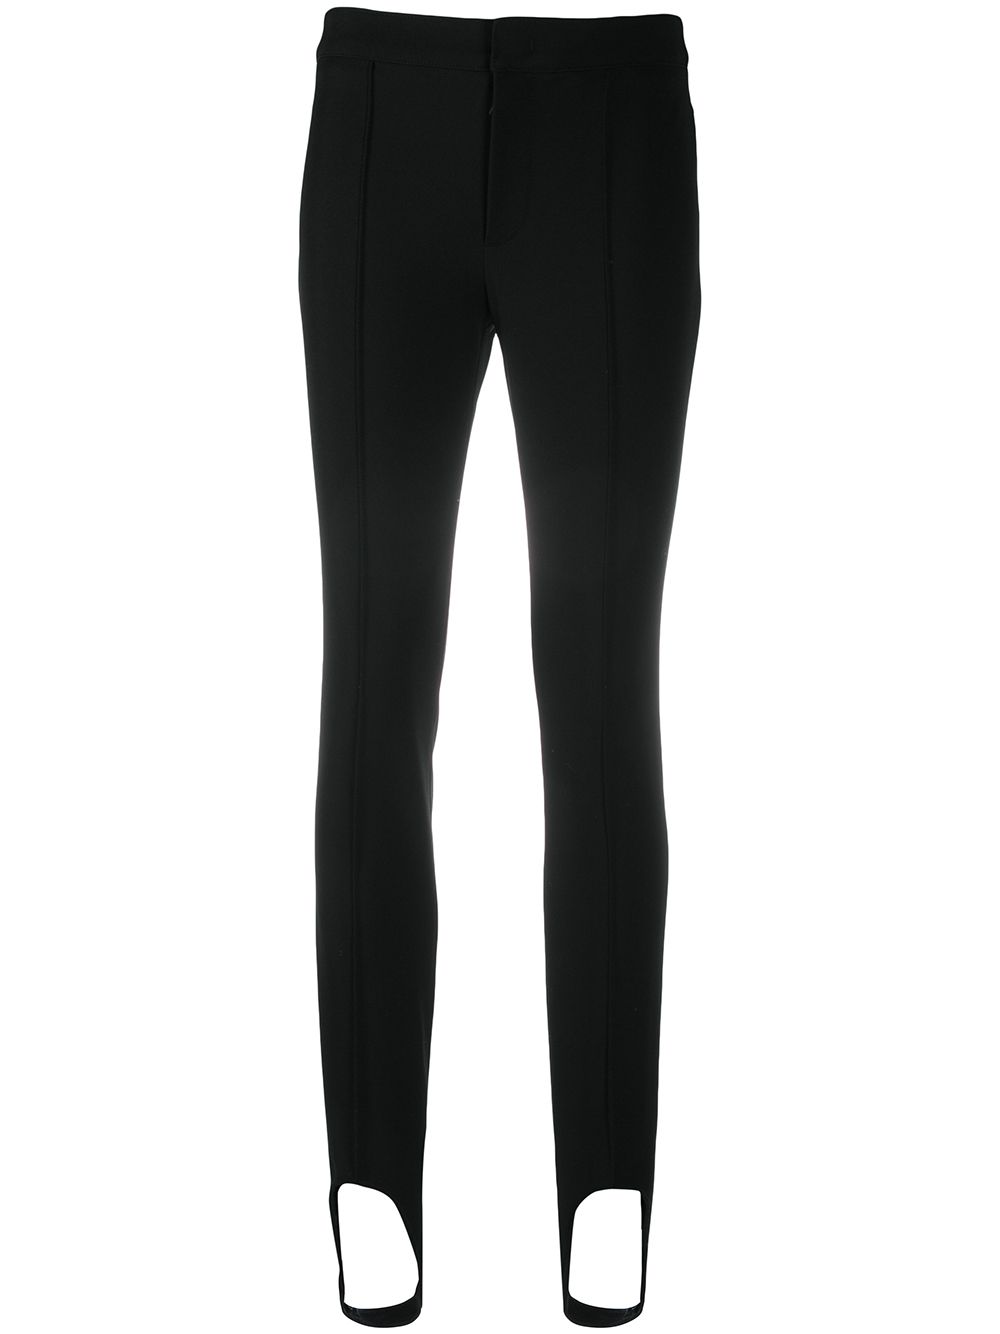 Moncler Grenoble Fitted Stirrup Leggings - Farfetch